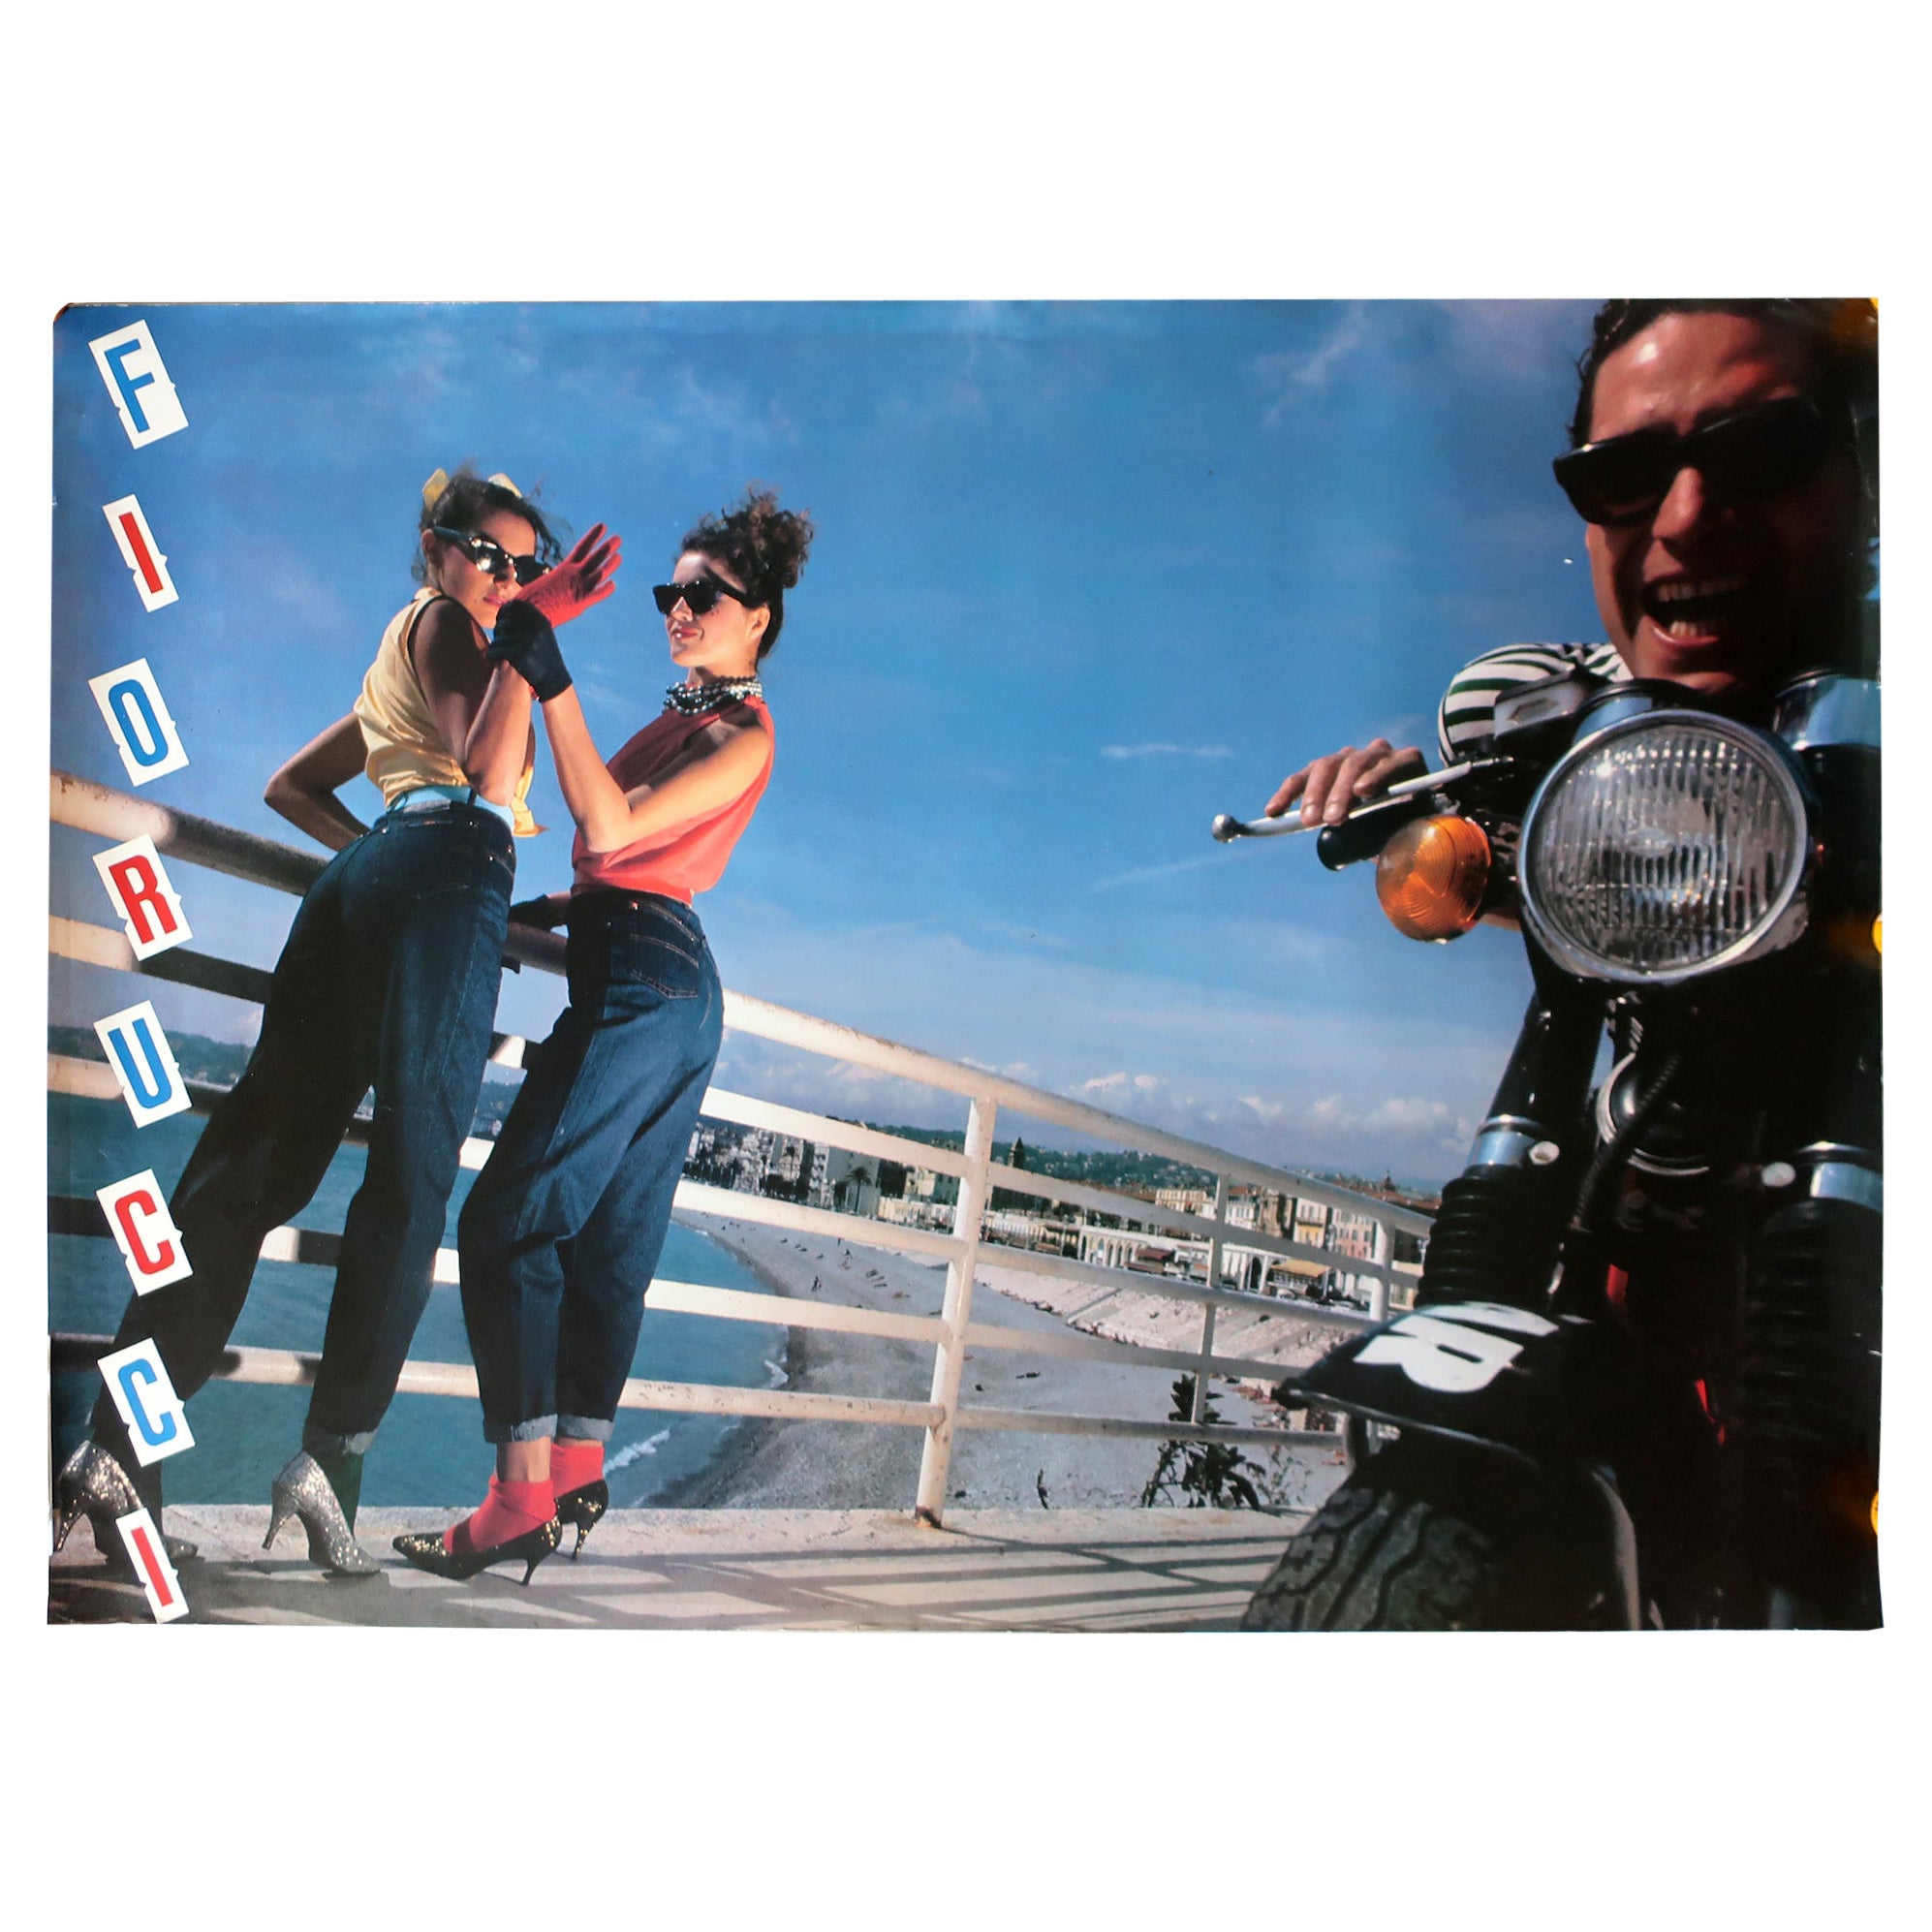 Vintage Fiorucci “Girls and Motorcycle on a Pier” Poster 1981